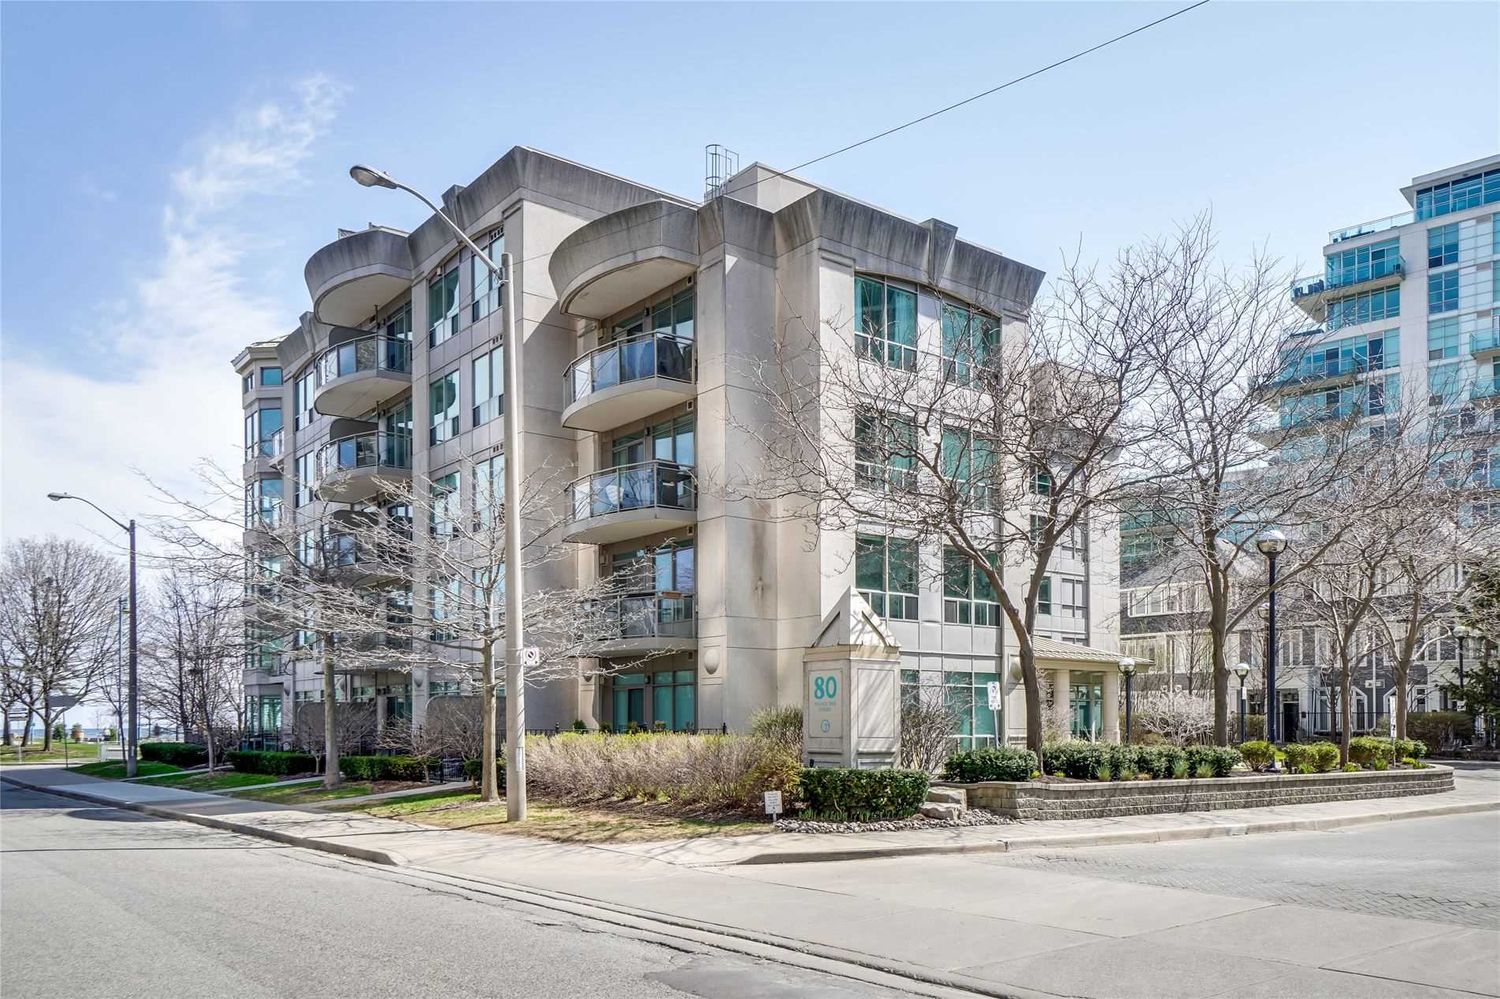 80 Palace Pier Court. Nevis Condos is located in  Etobicoke, Toronto - image #3 of 3